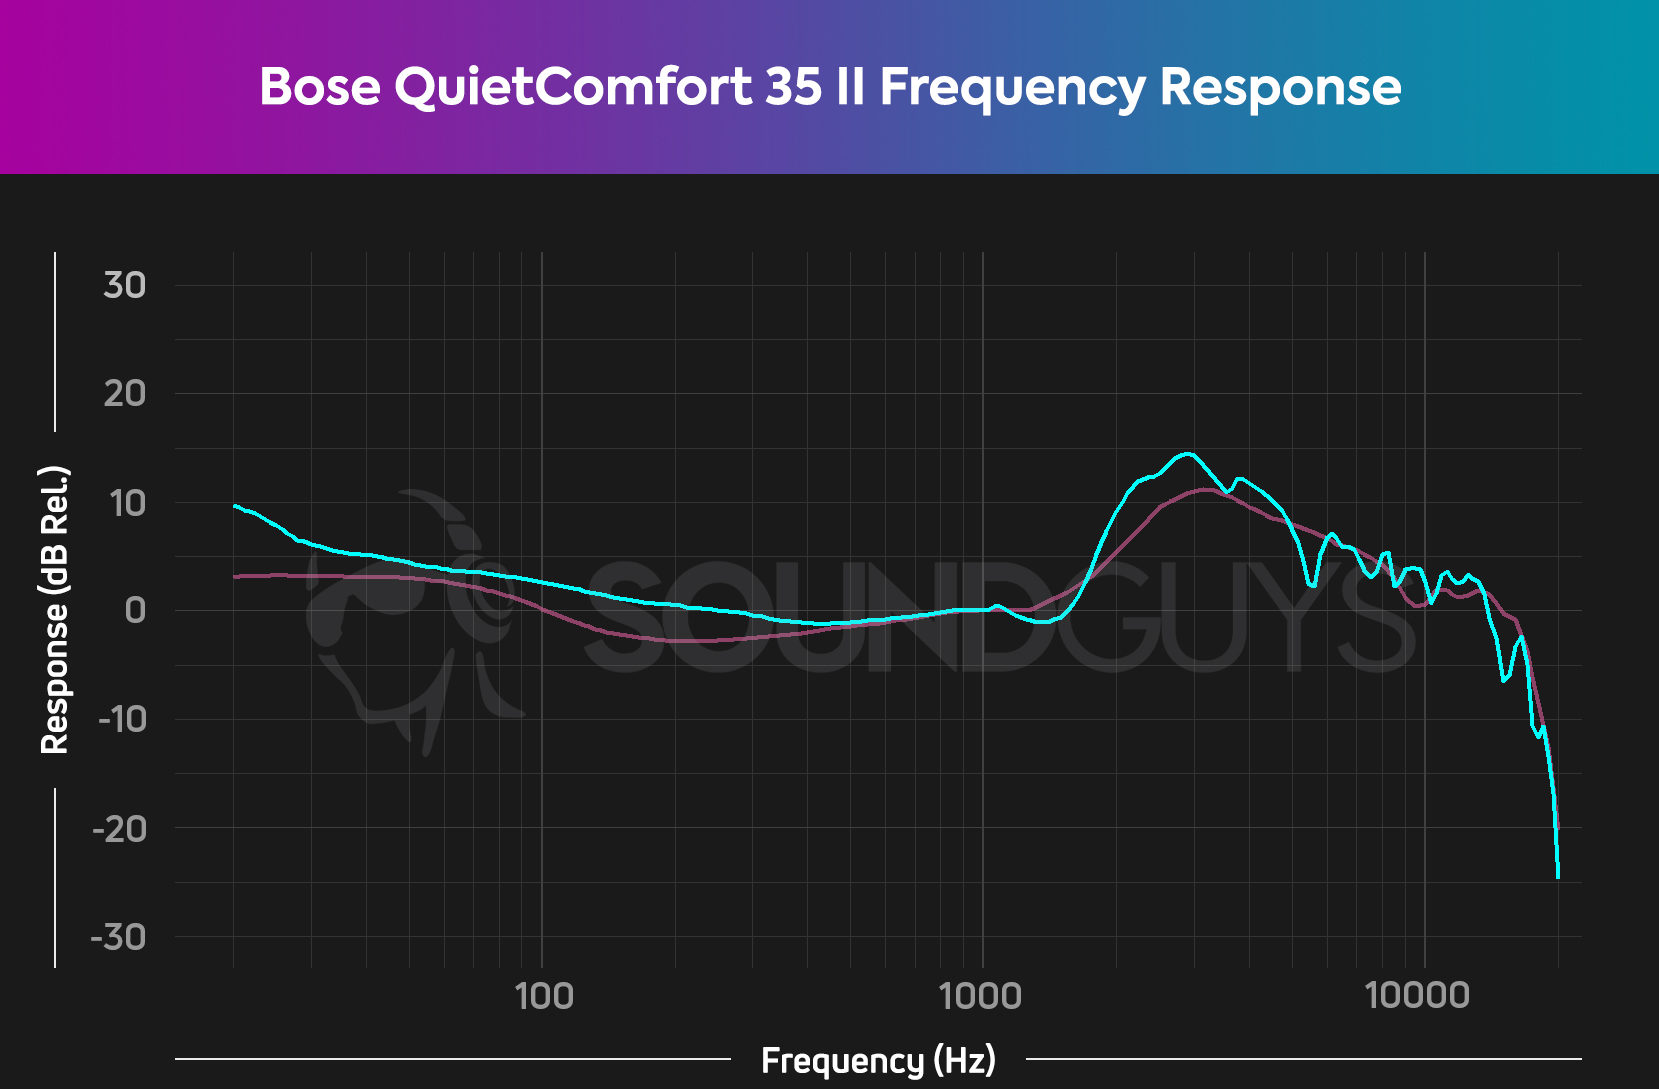 A frequency response chart for the Bose QuietComfort 35 II noise canceling headphones.